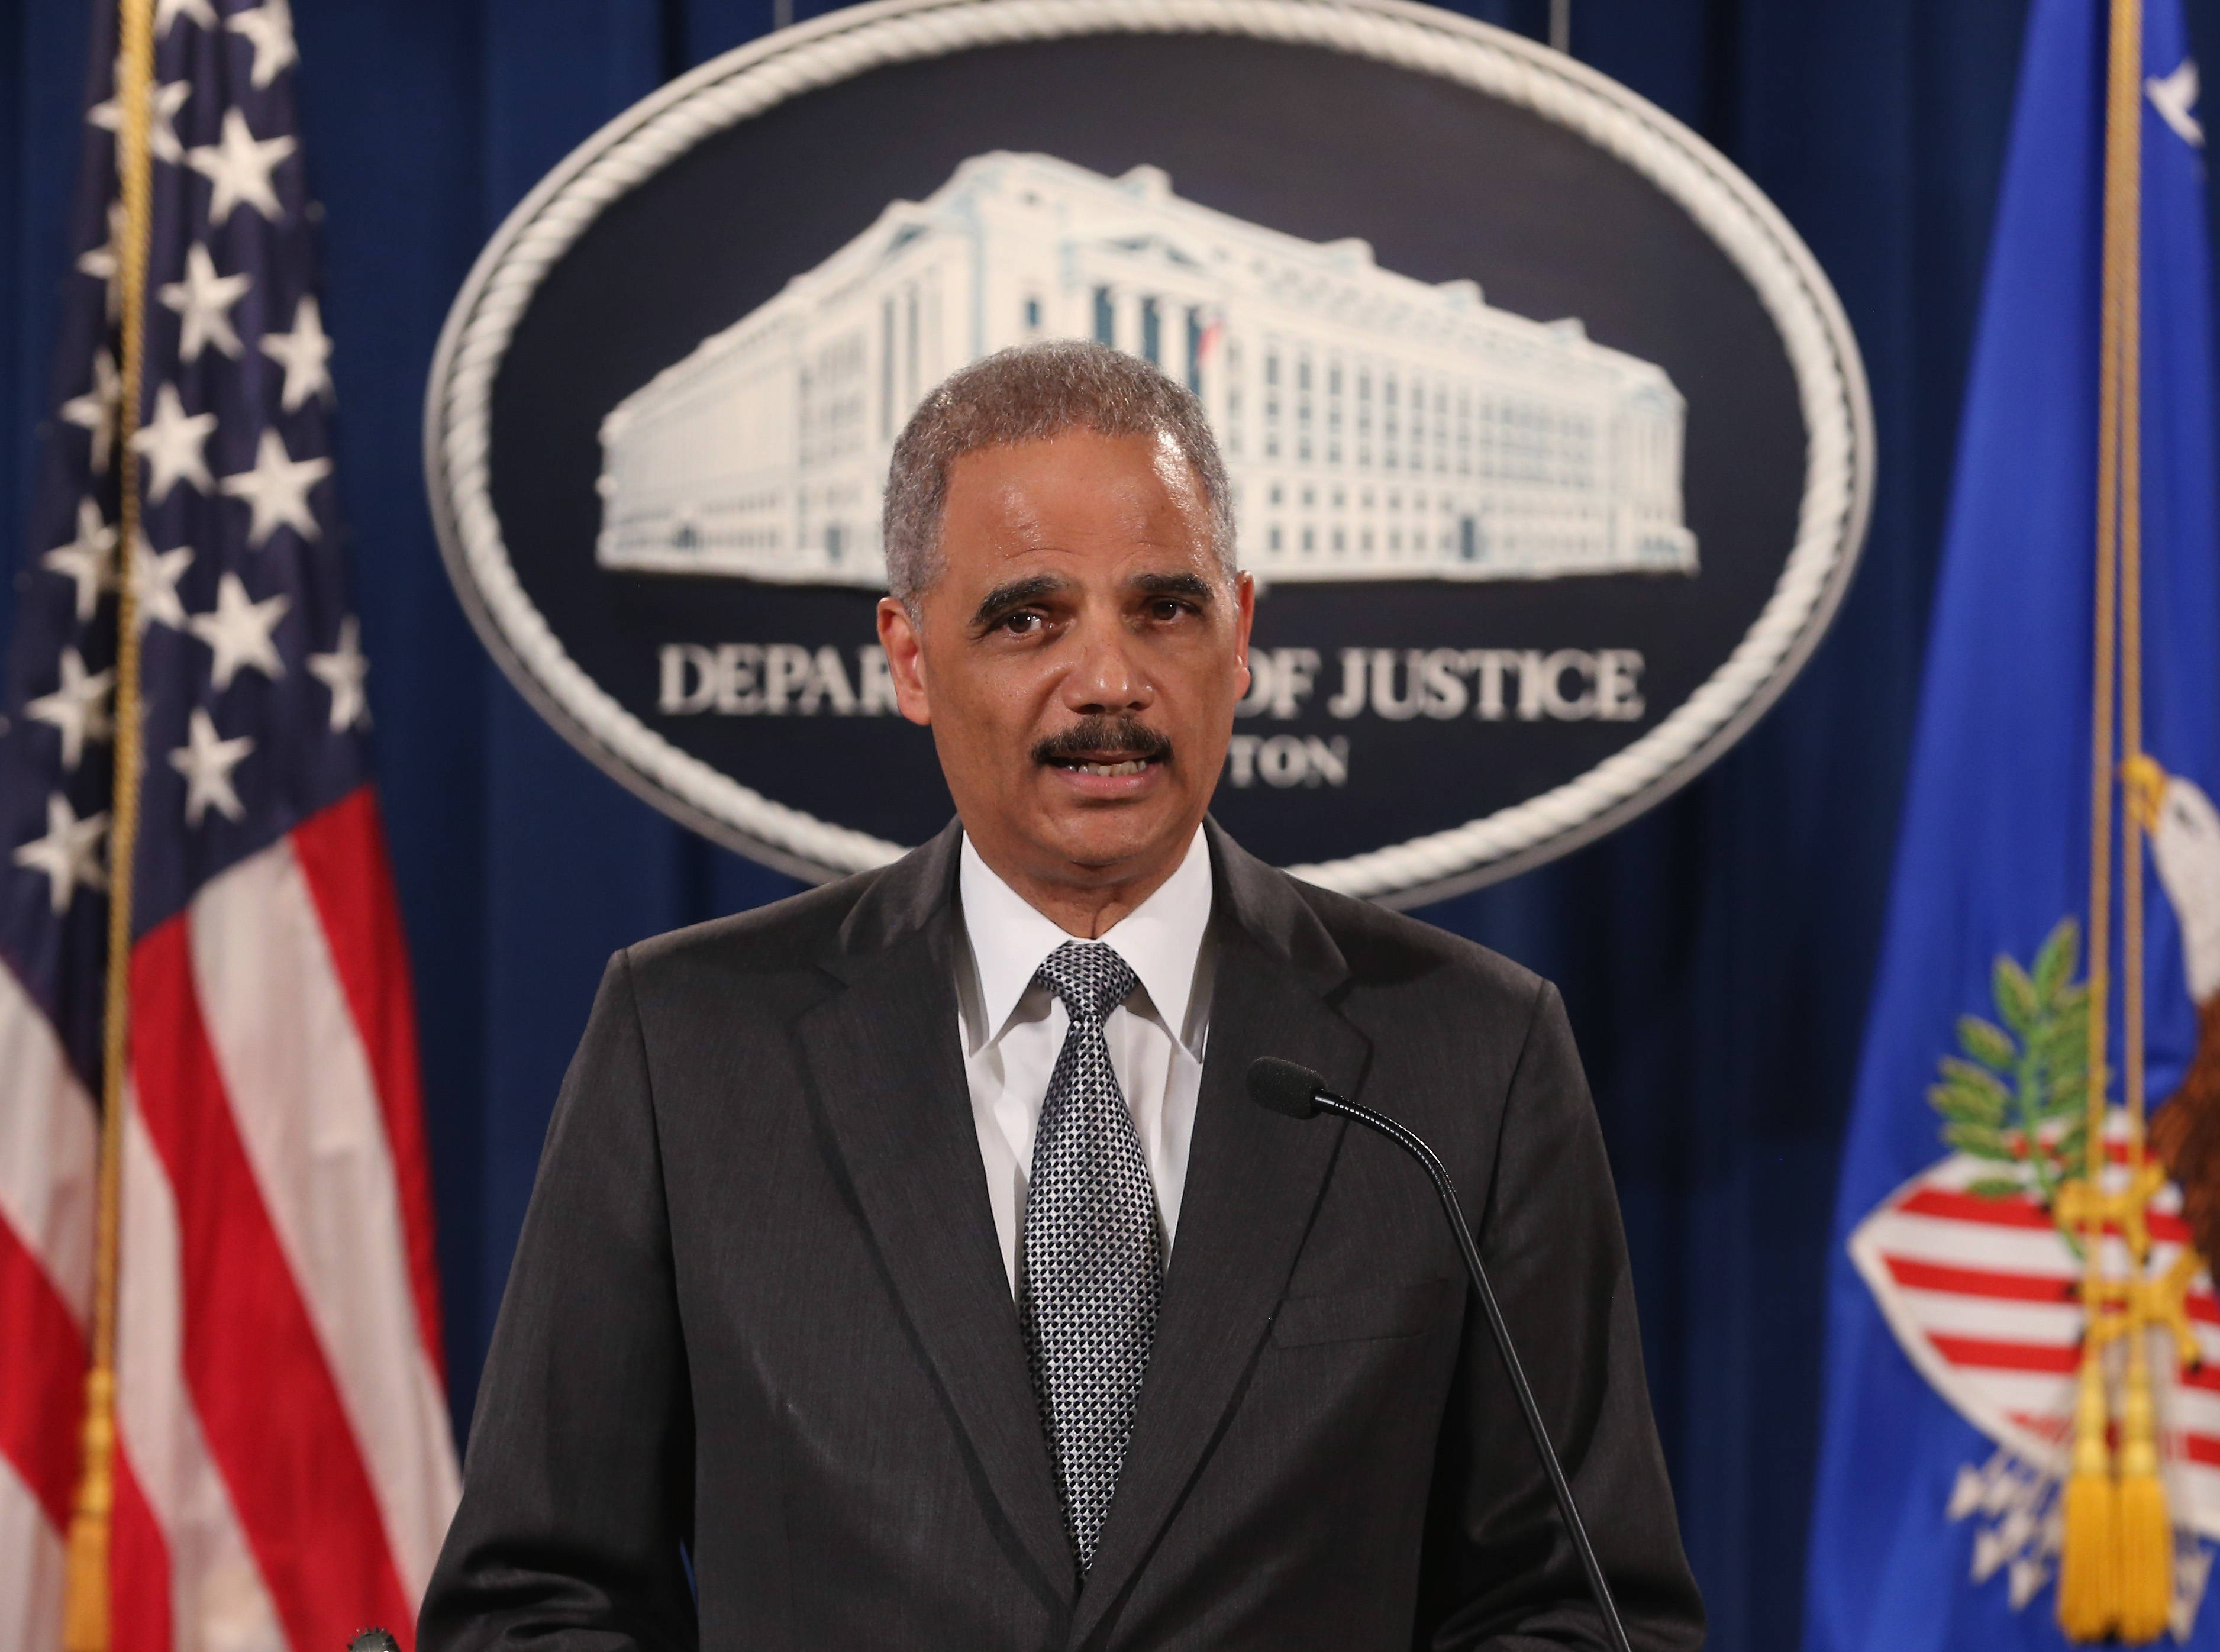 U.S. Attorney General Eric Holder speaks at the Justice Department on Dec. 3, 2014 in Washington D.C. (Mark Wilson—Getty Images)